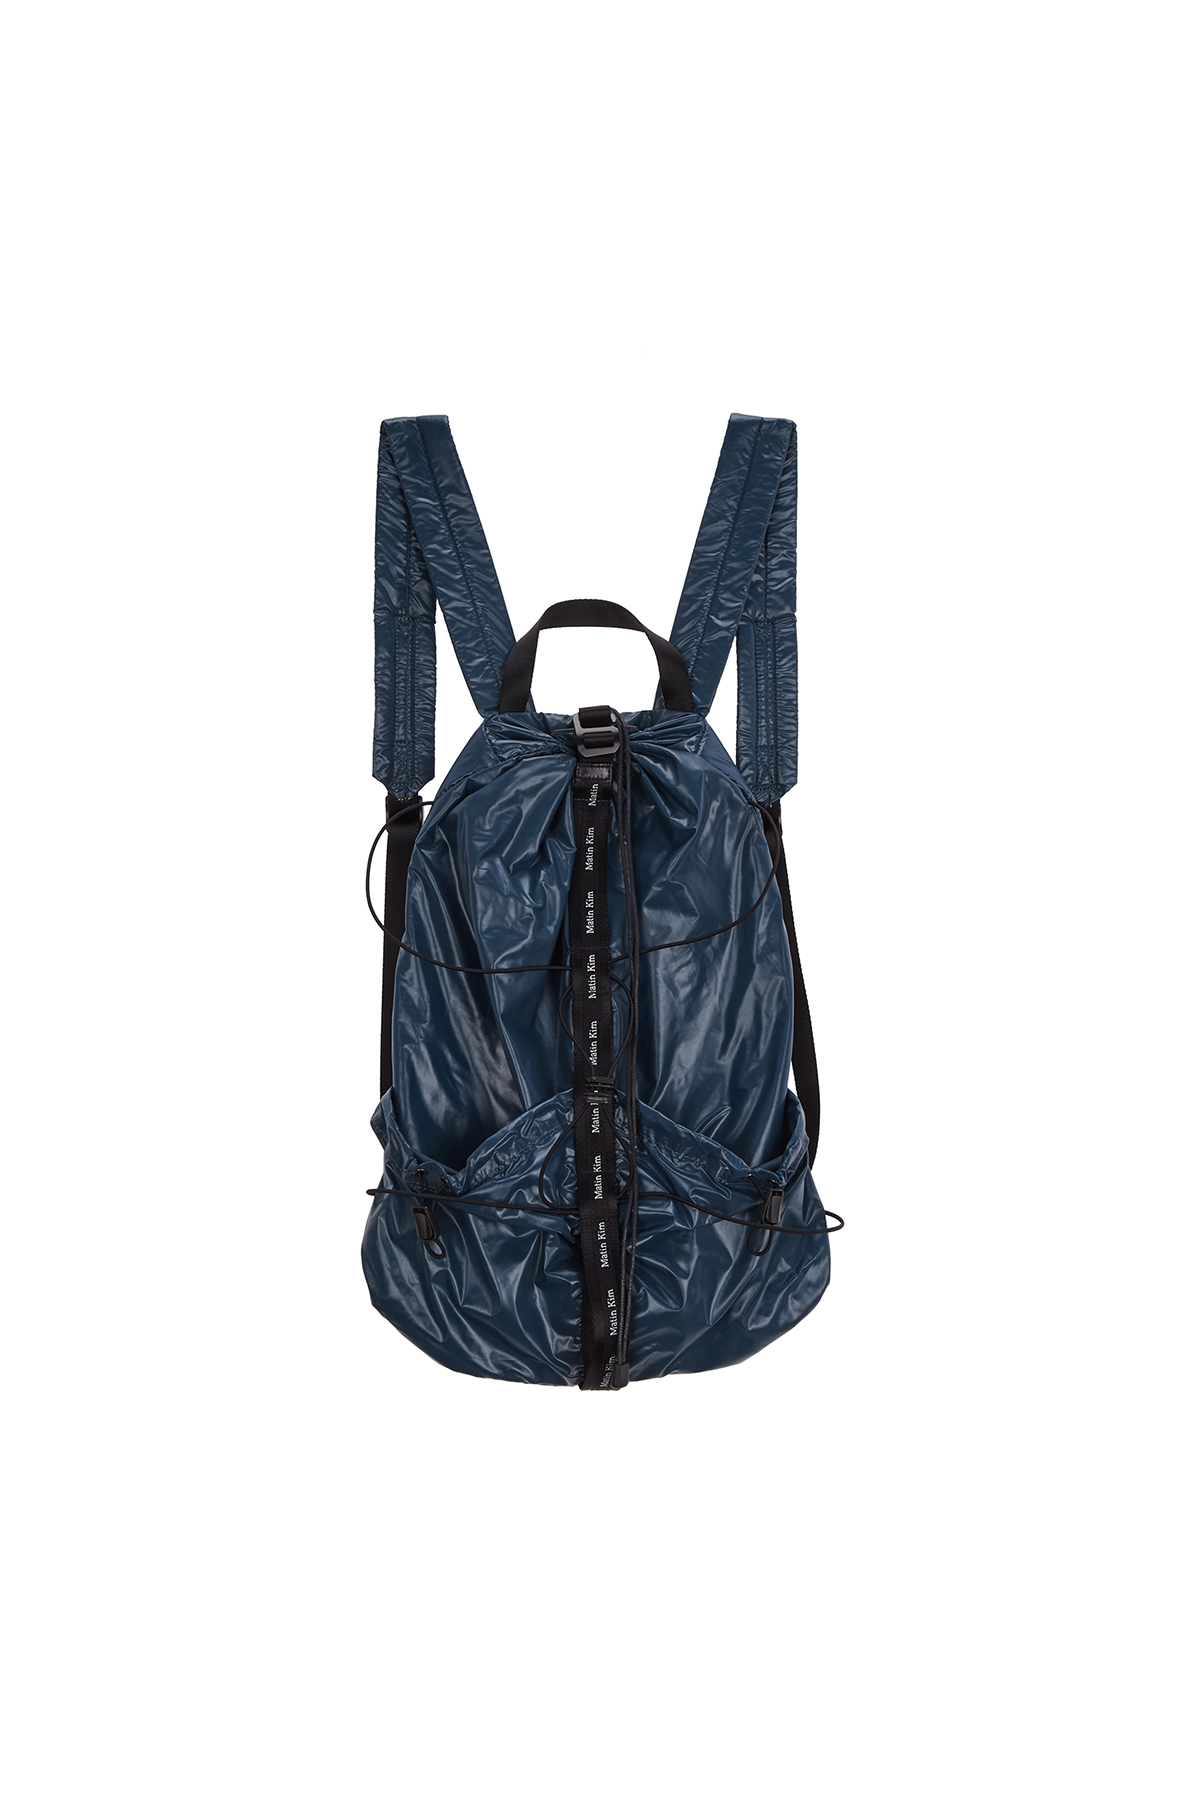 SATURN STRING BACK PACK IN TUQUISE BLUE